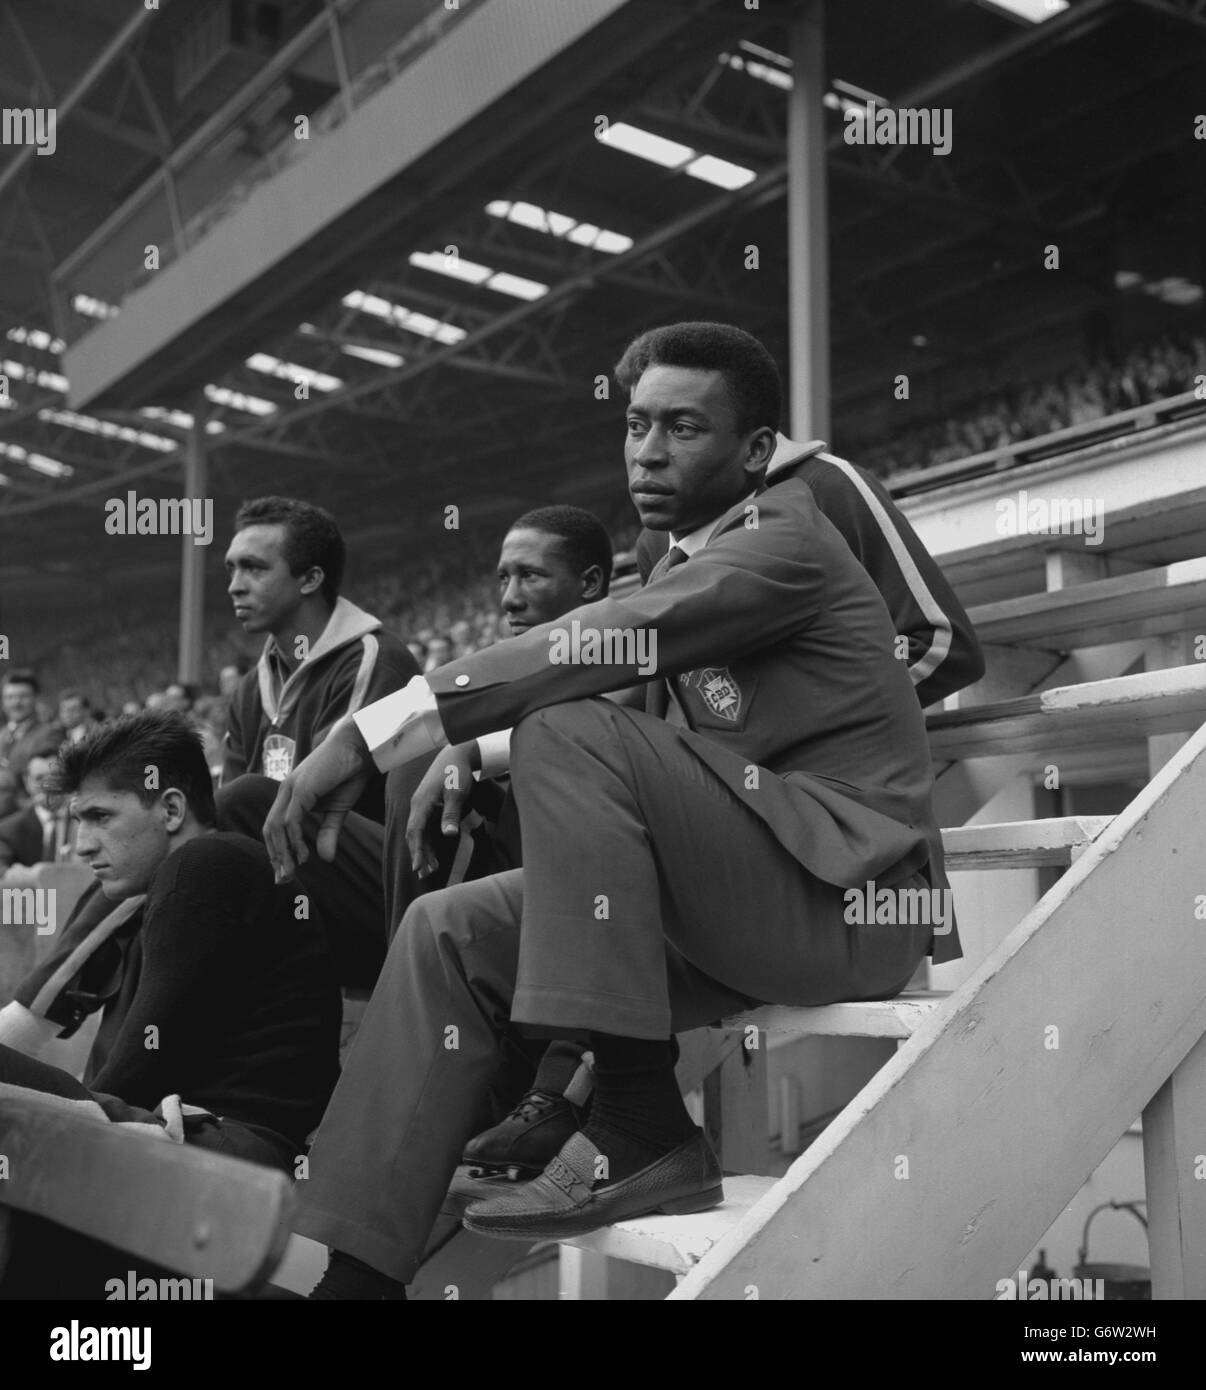 Brazilian footballer Pele (r), still feeling the effects of injuries sustained in a crash in Hamburg, sits in the stand during the international friendly against England at Wembley Stadium, London. Just before kick-off, a near-capacity crowd booed the announcement that Pele would not be playing. The match ended 1-1. Stock Photo